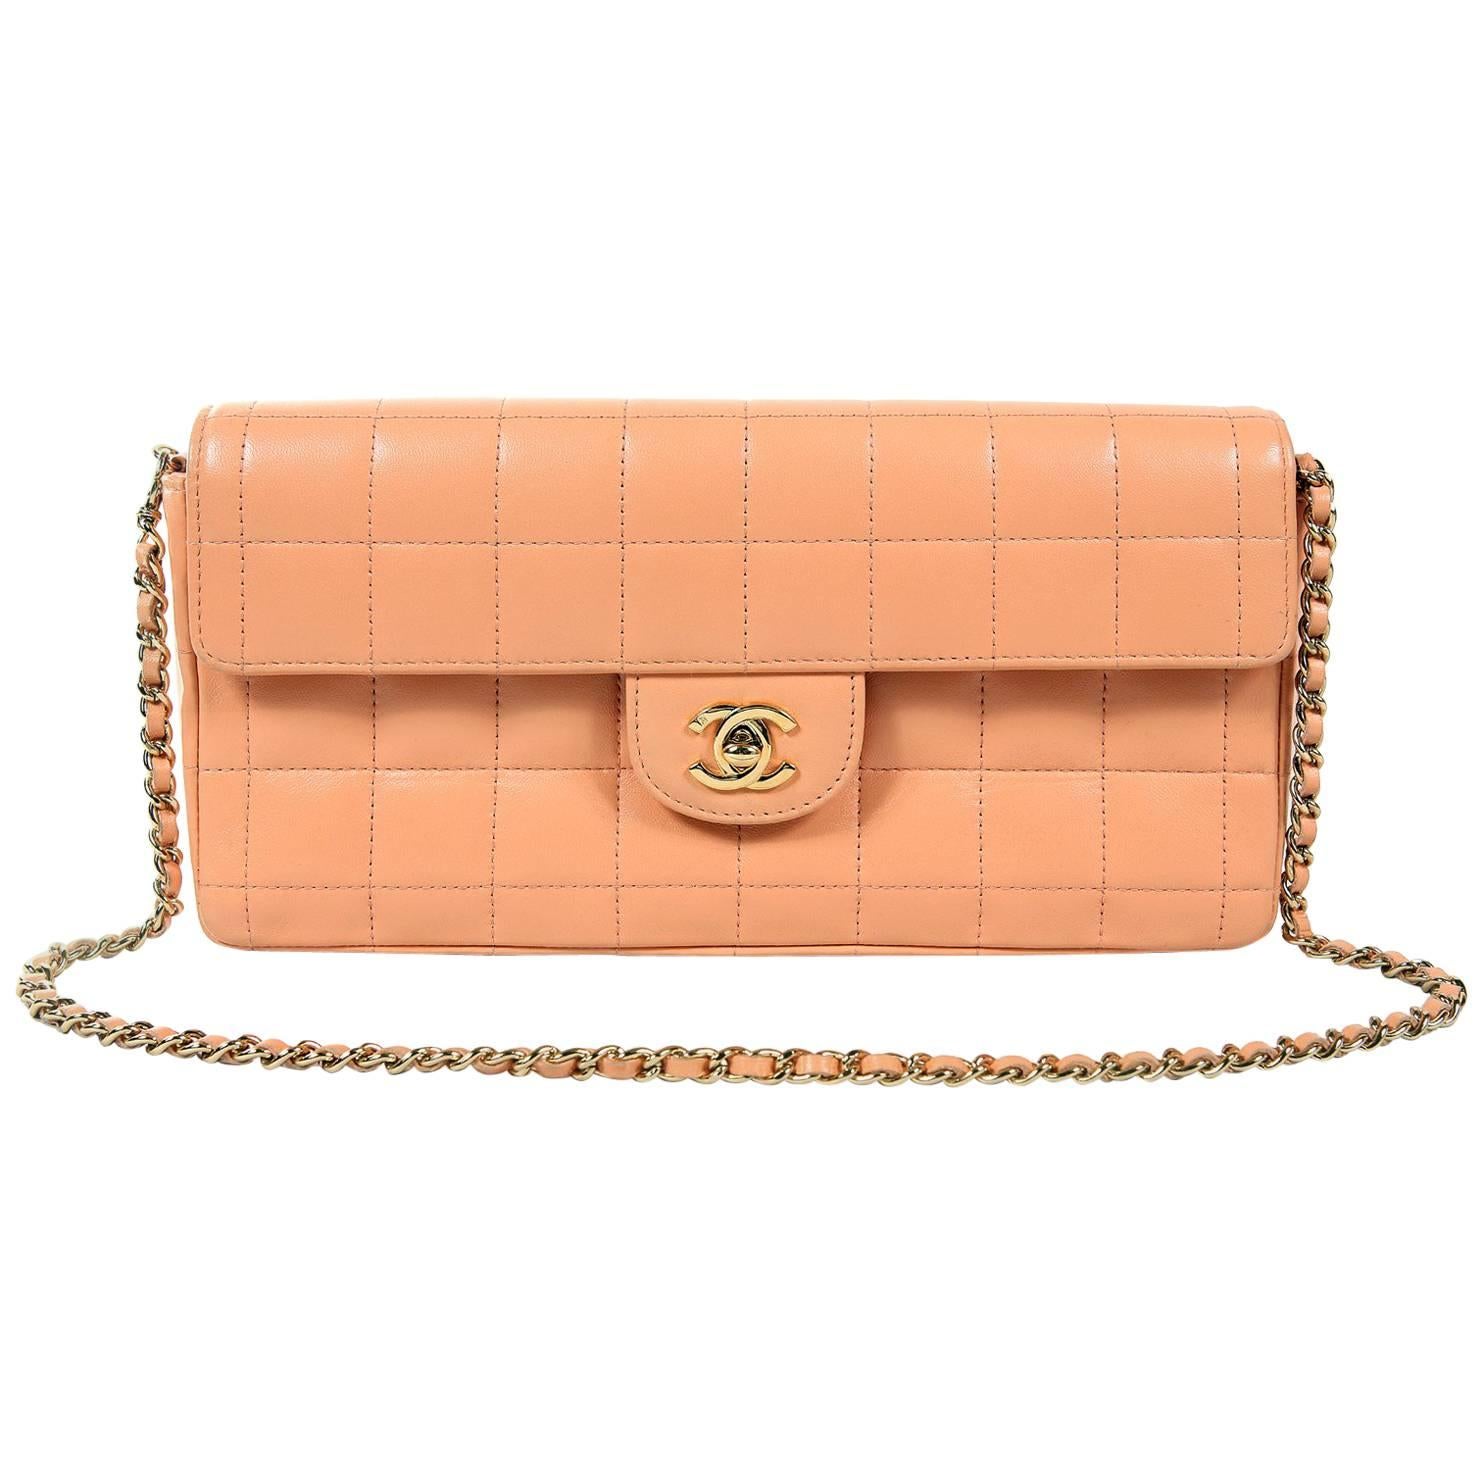 Chanel Pink Square Quilted Leather East West Flap Bag